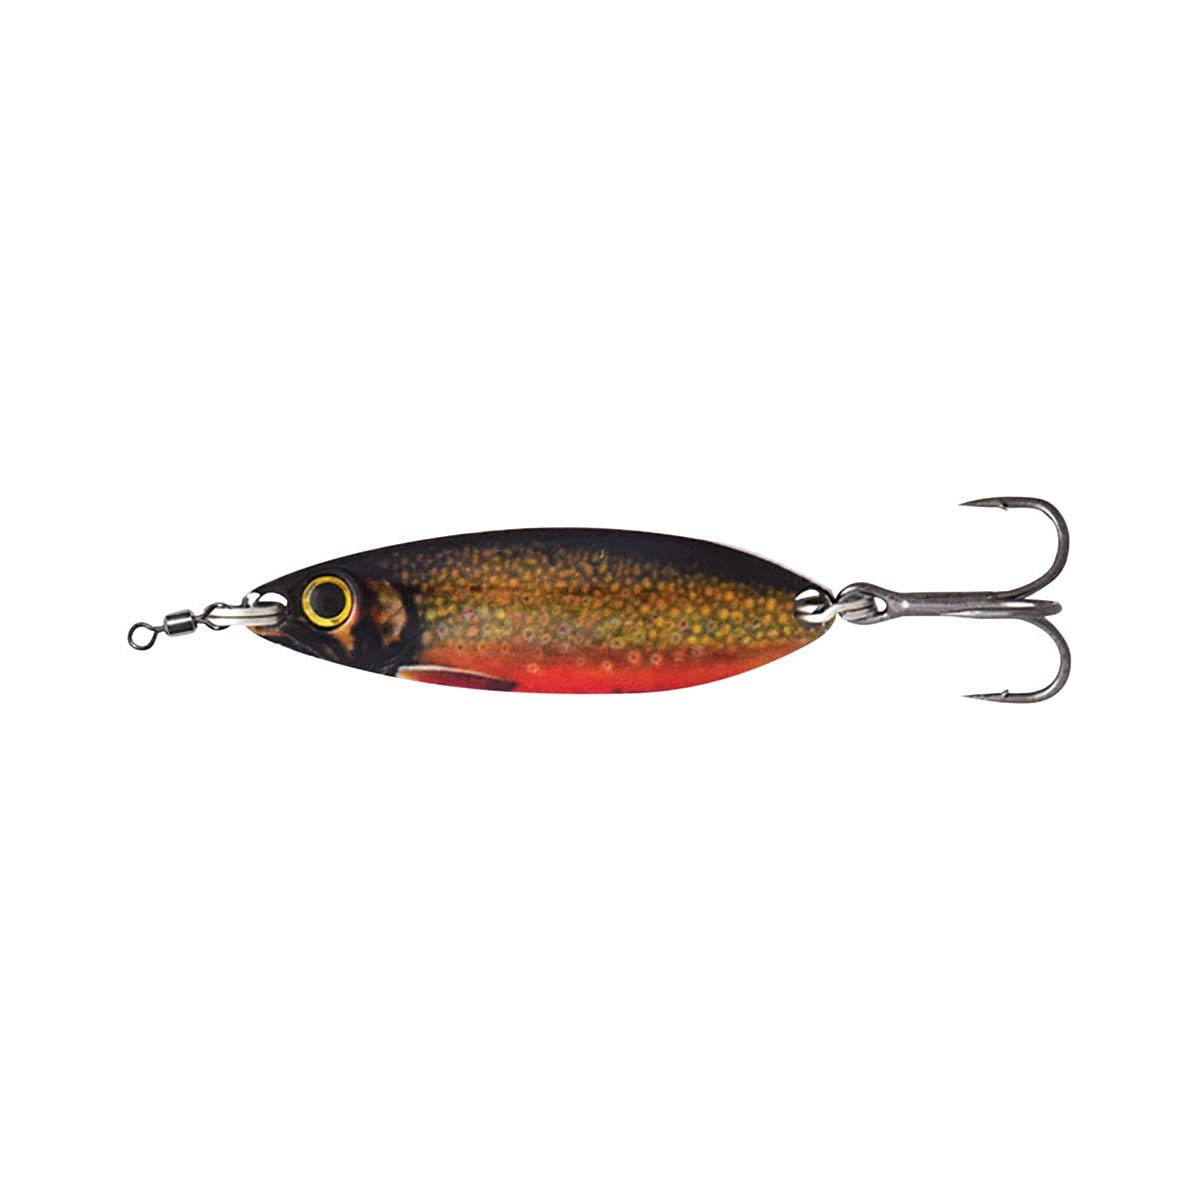 Black Magic Enticer Lure 7g Red Belly